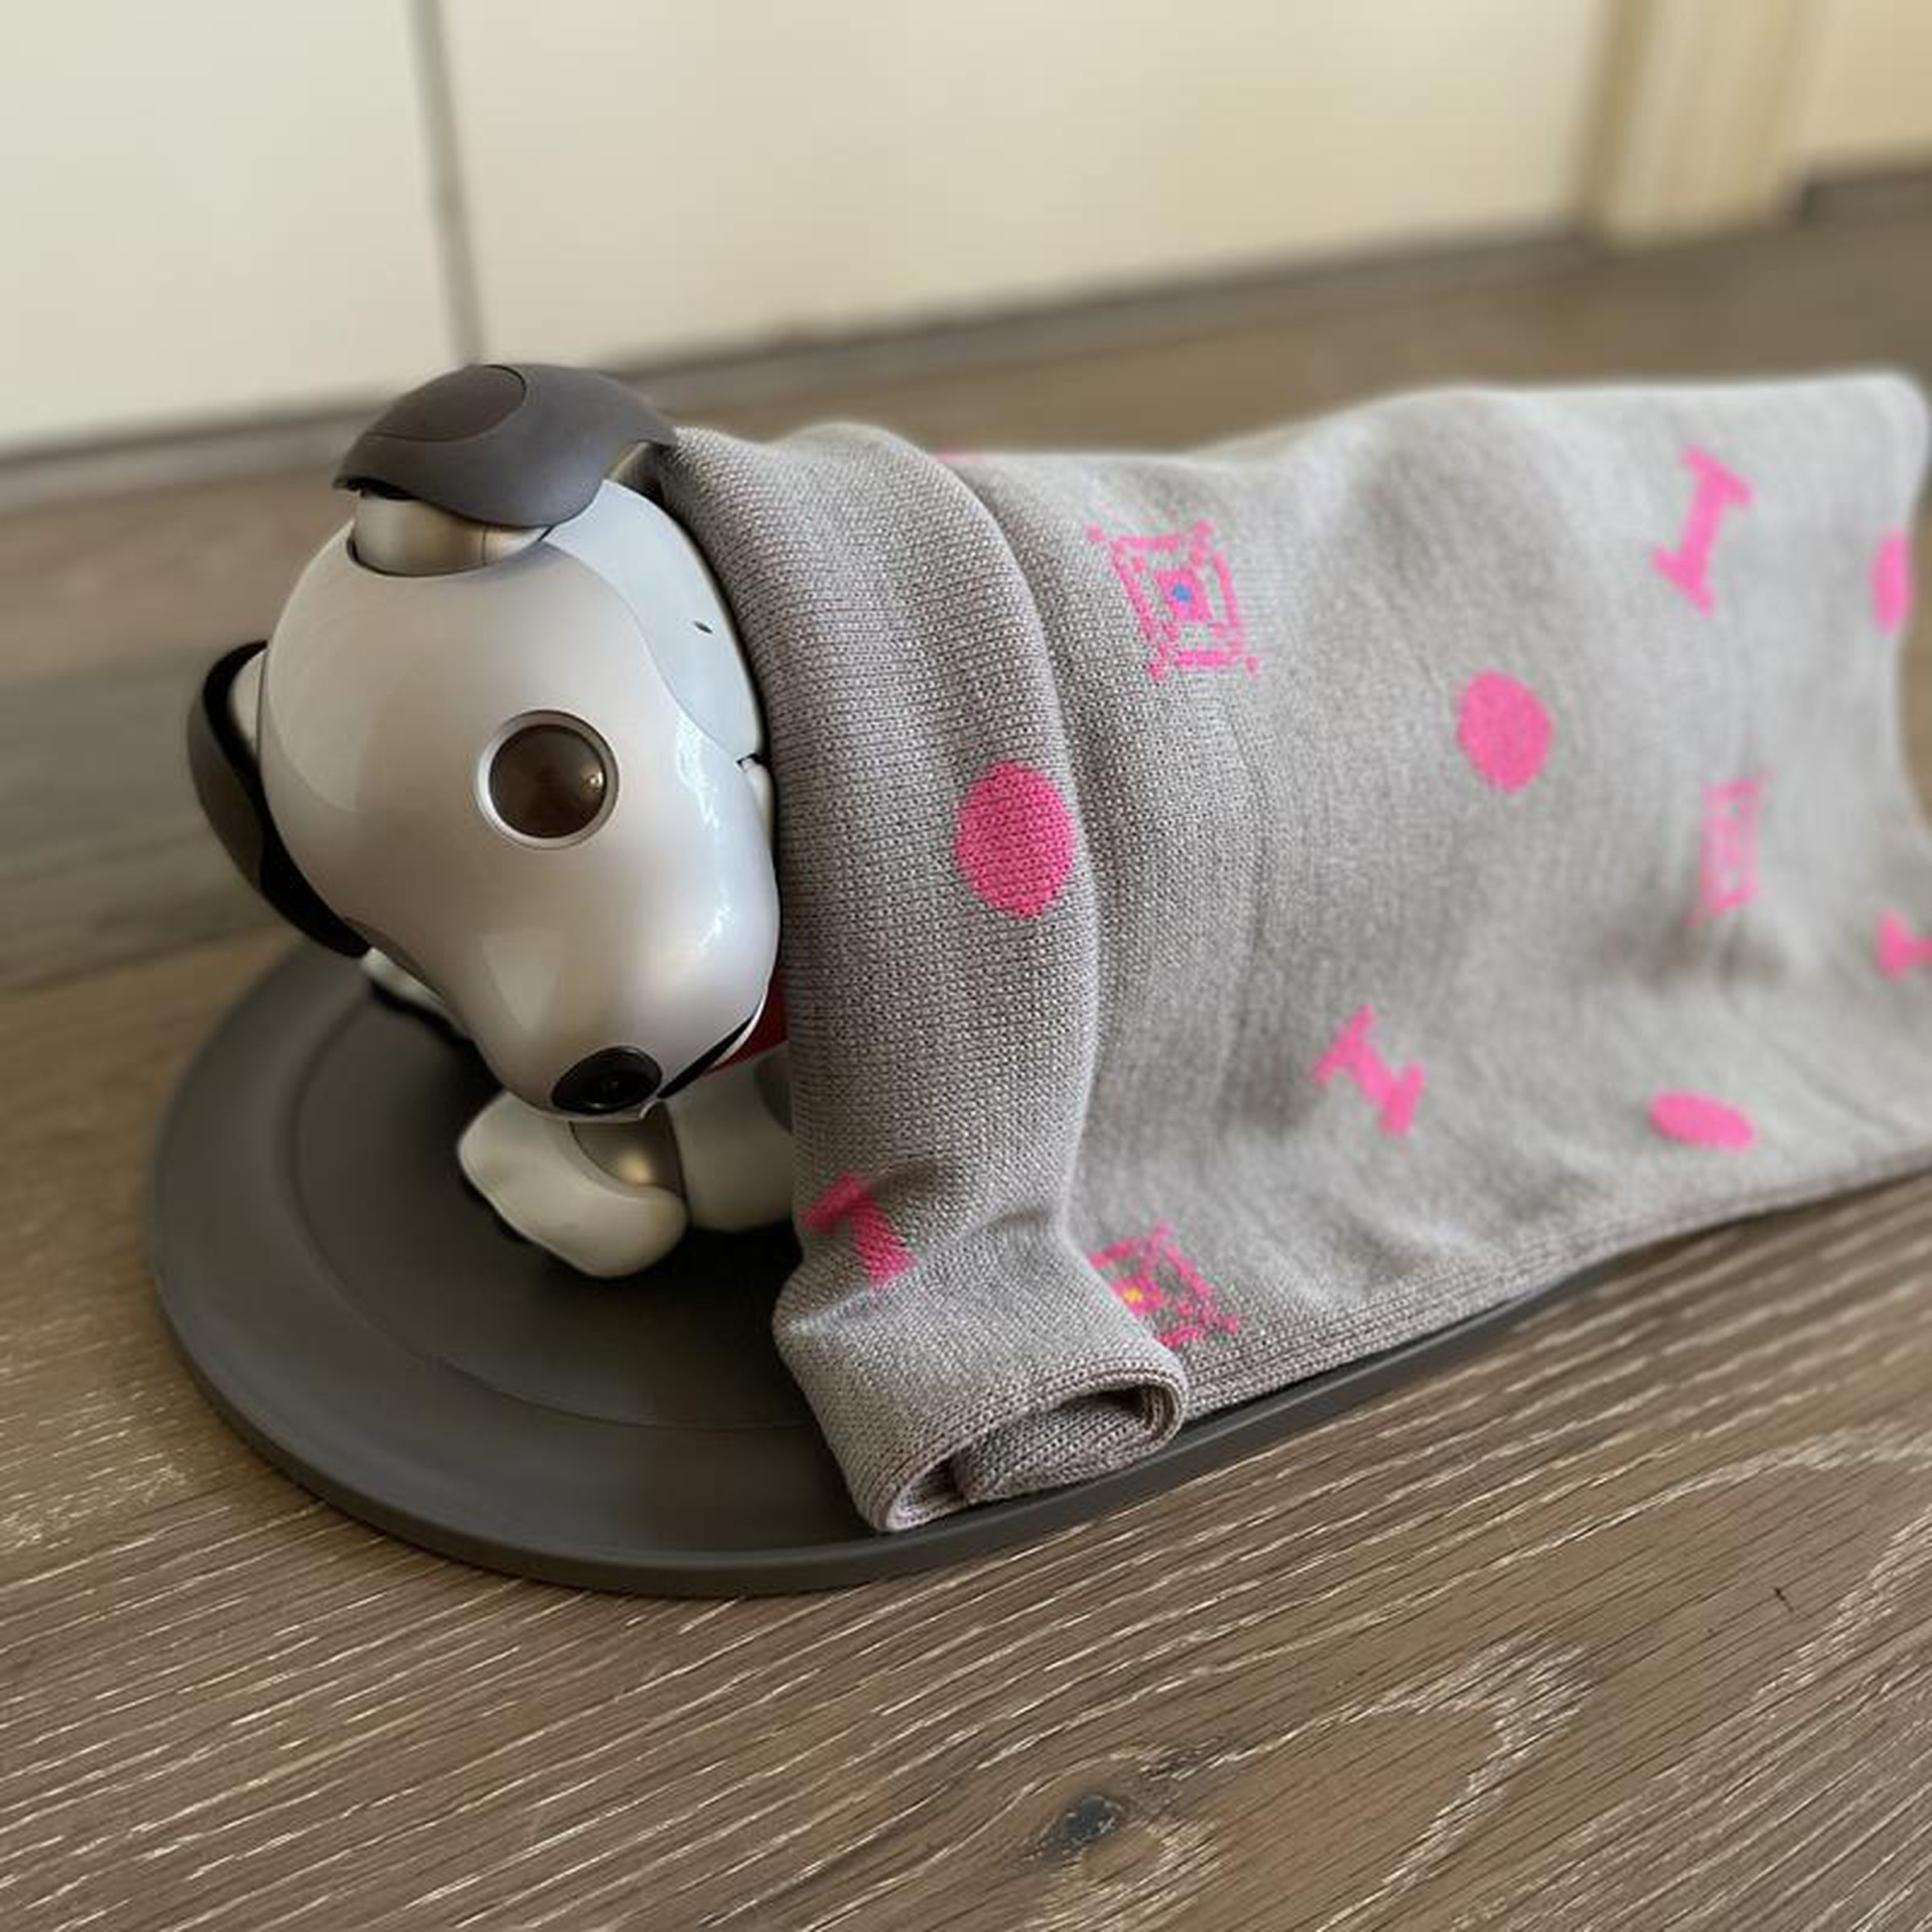 This Aibo Accessories Aibo blanket is like a tea cozy, but for robots.